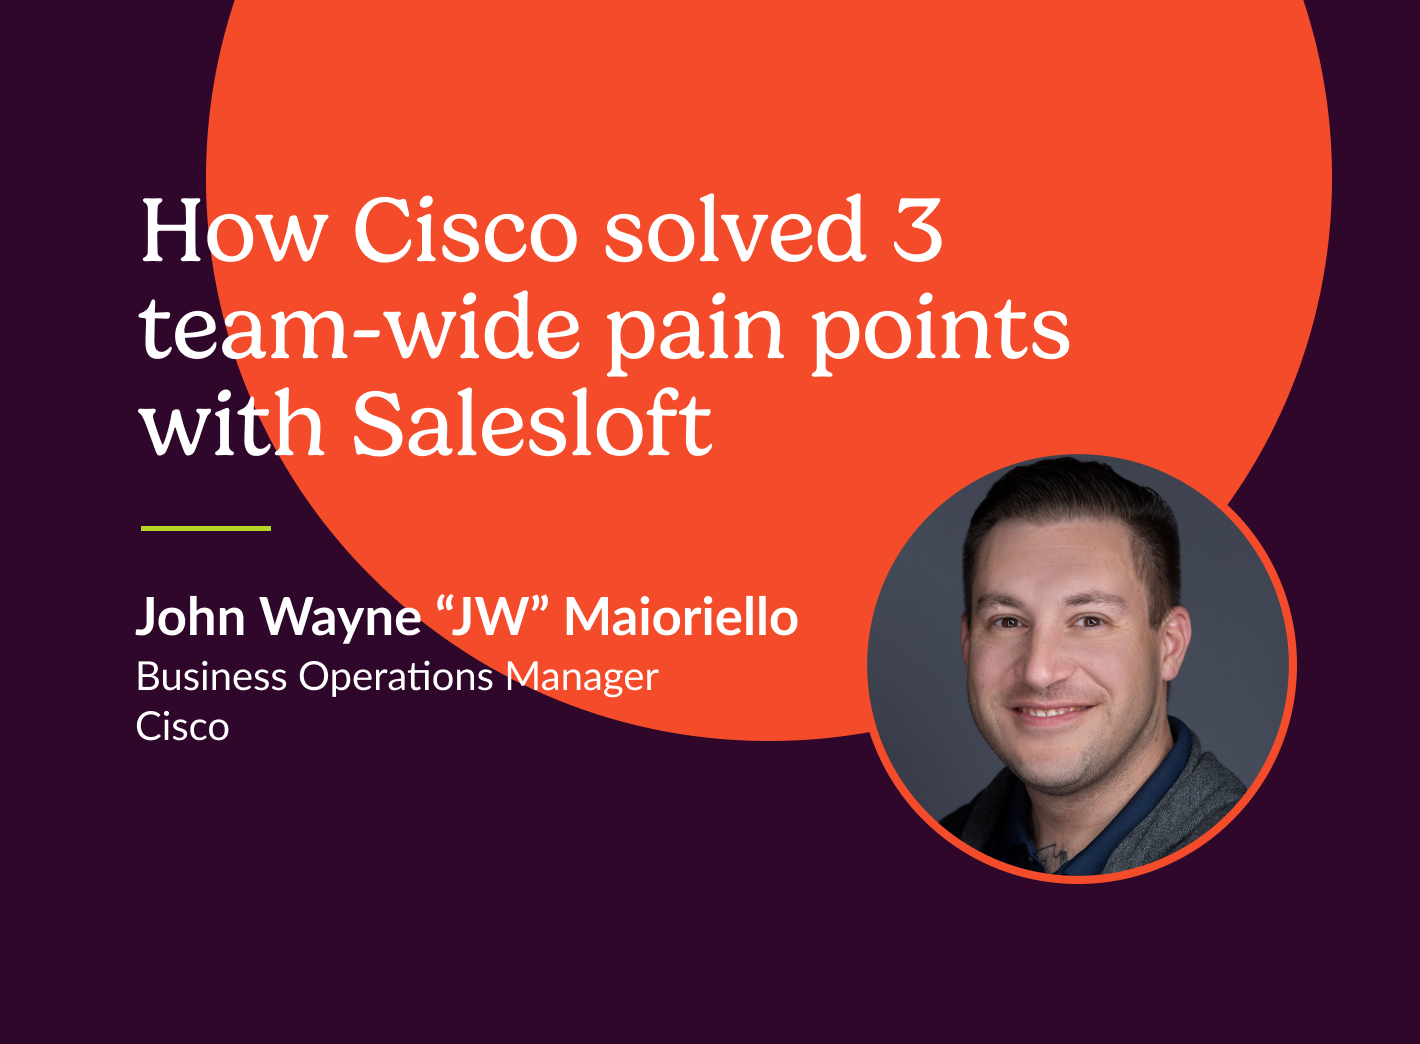 Header that states, "How Cisco solved 3 team-wide pain points with Salesloft"